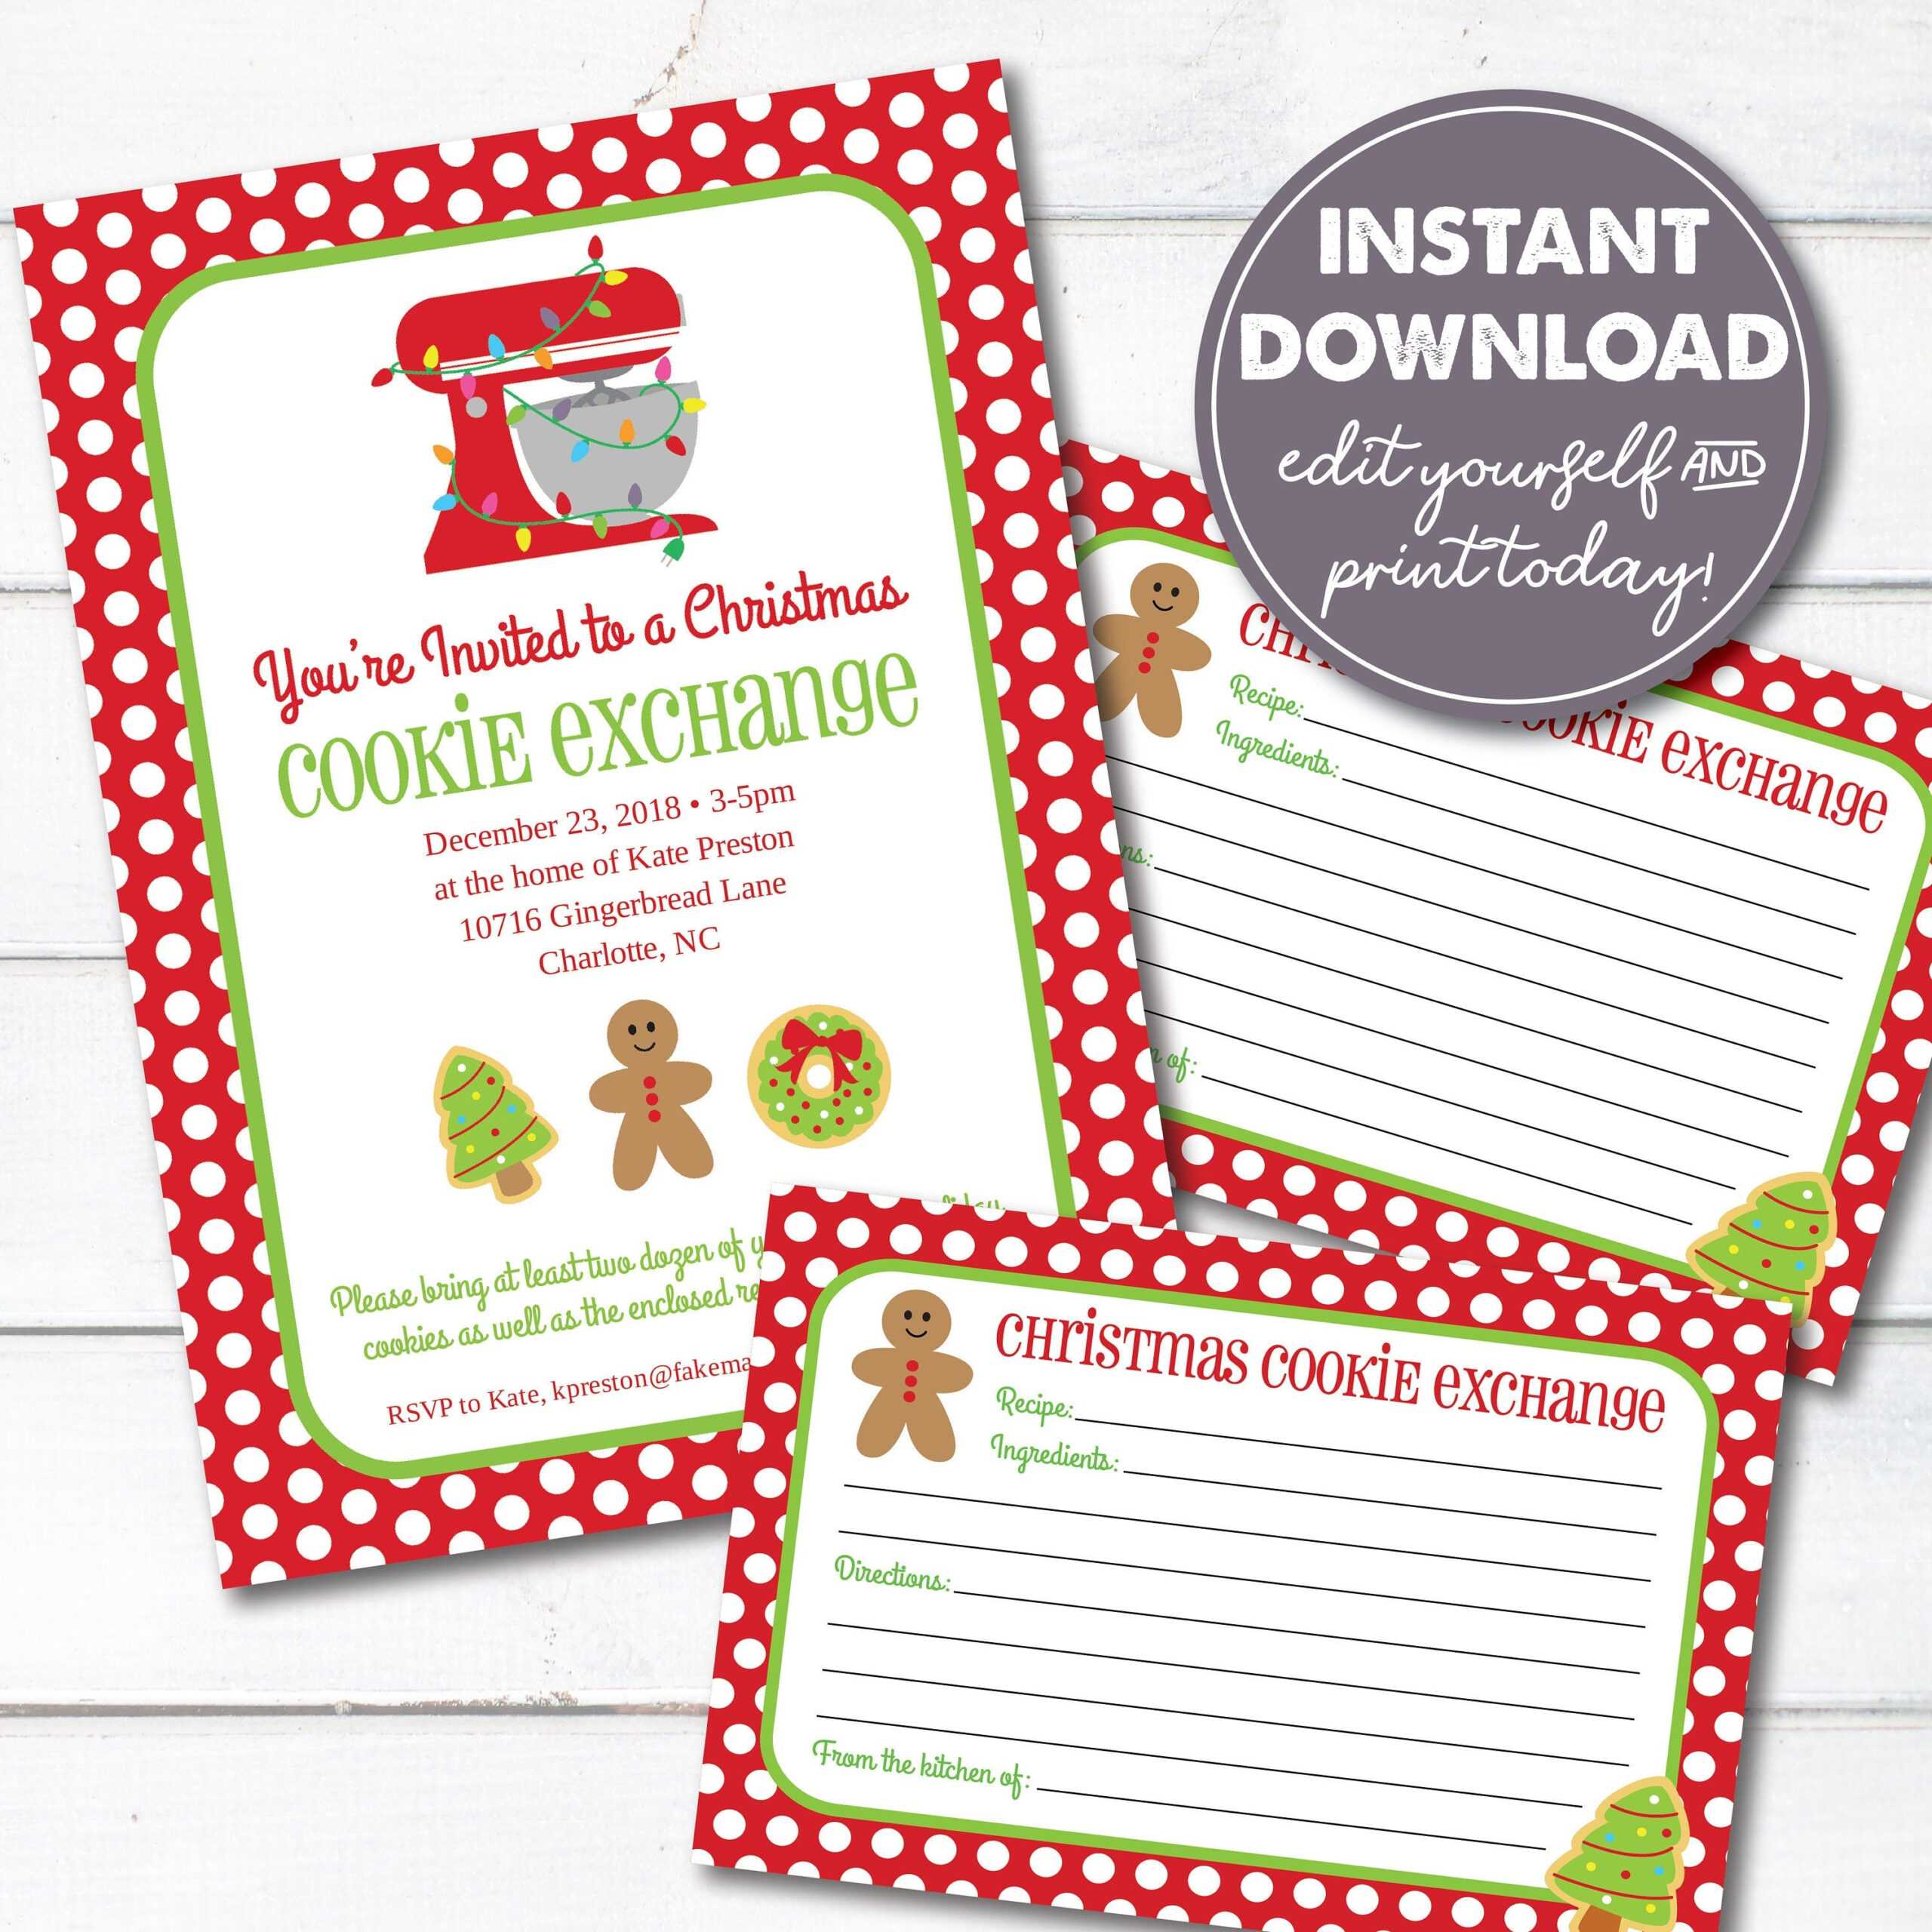 Editable Cookie Exchange Christmas Party Invitation And Recipe Cards,  Instant Download, Holiday Cookie Party Invitation Within Cookie Exchange Recipe Card Template